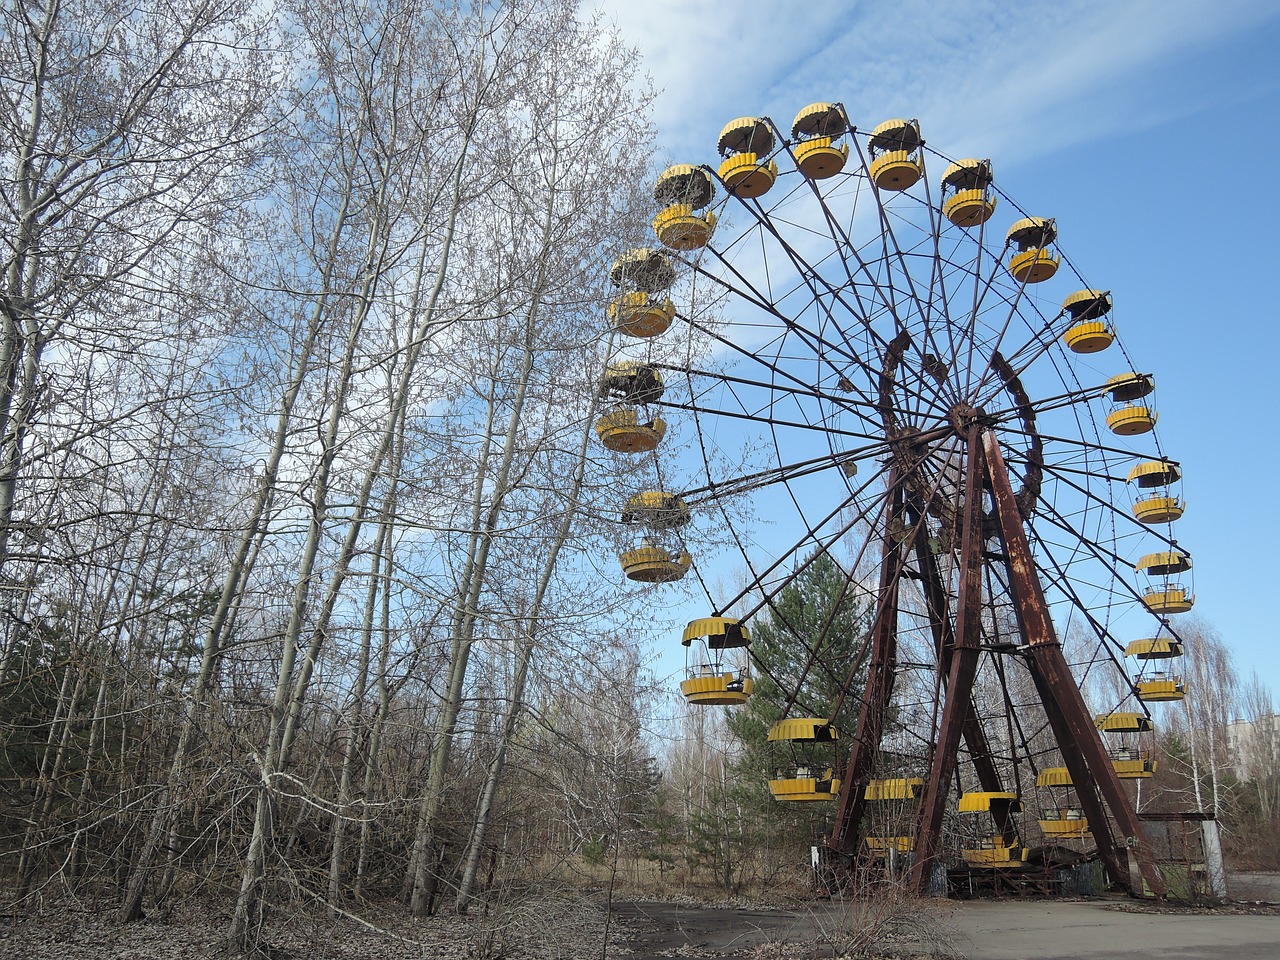 chernobyl disaster nuclear free photo